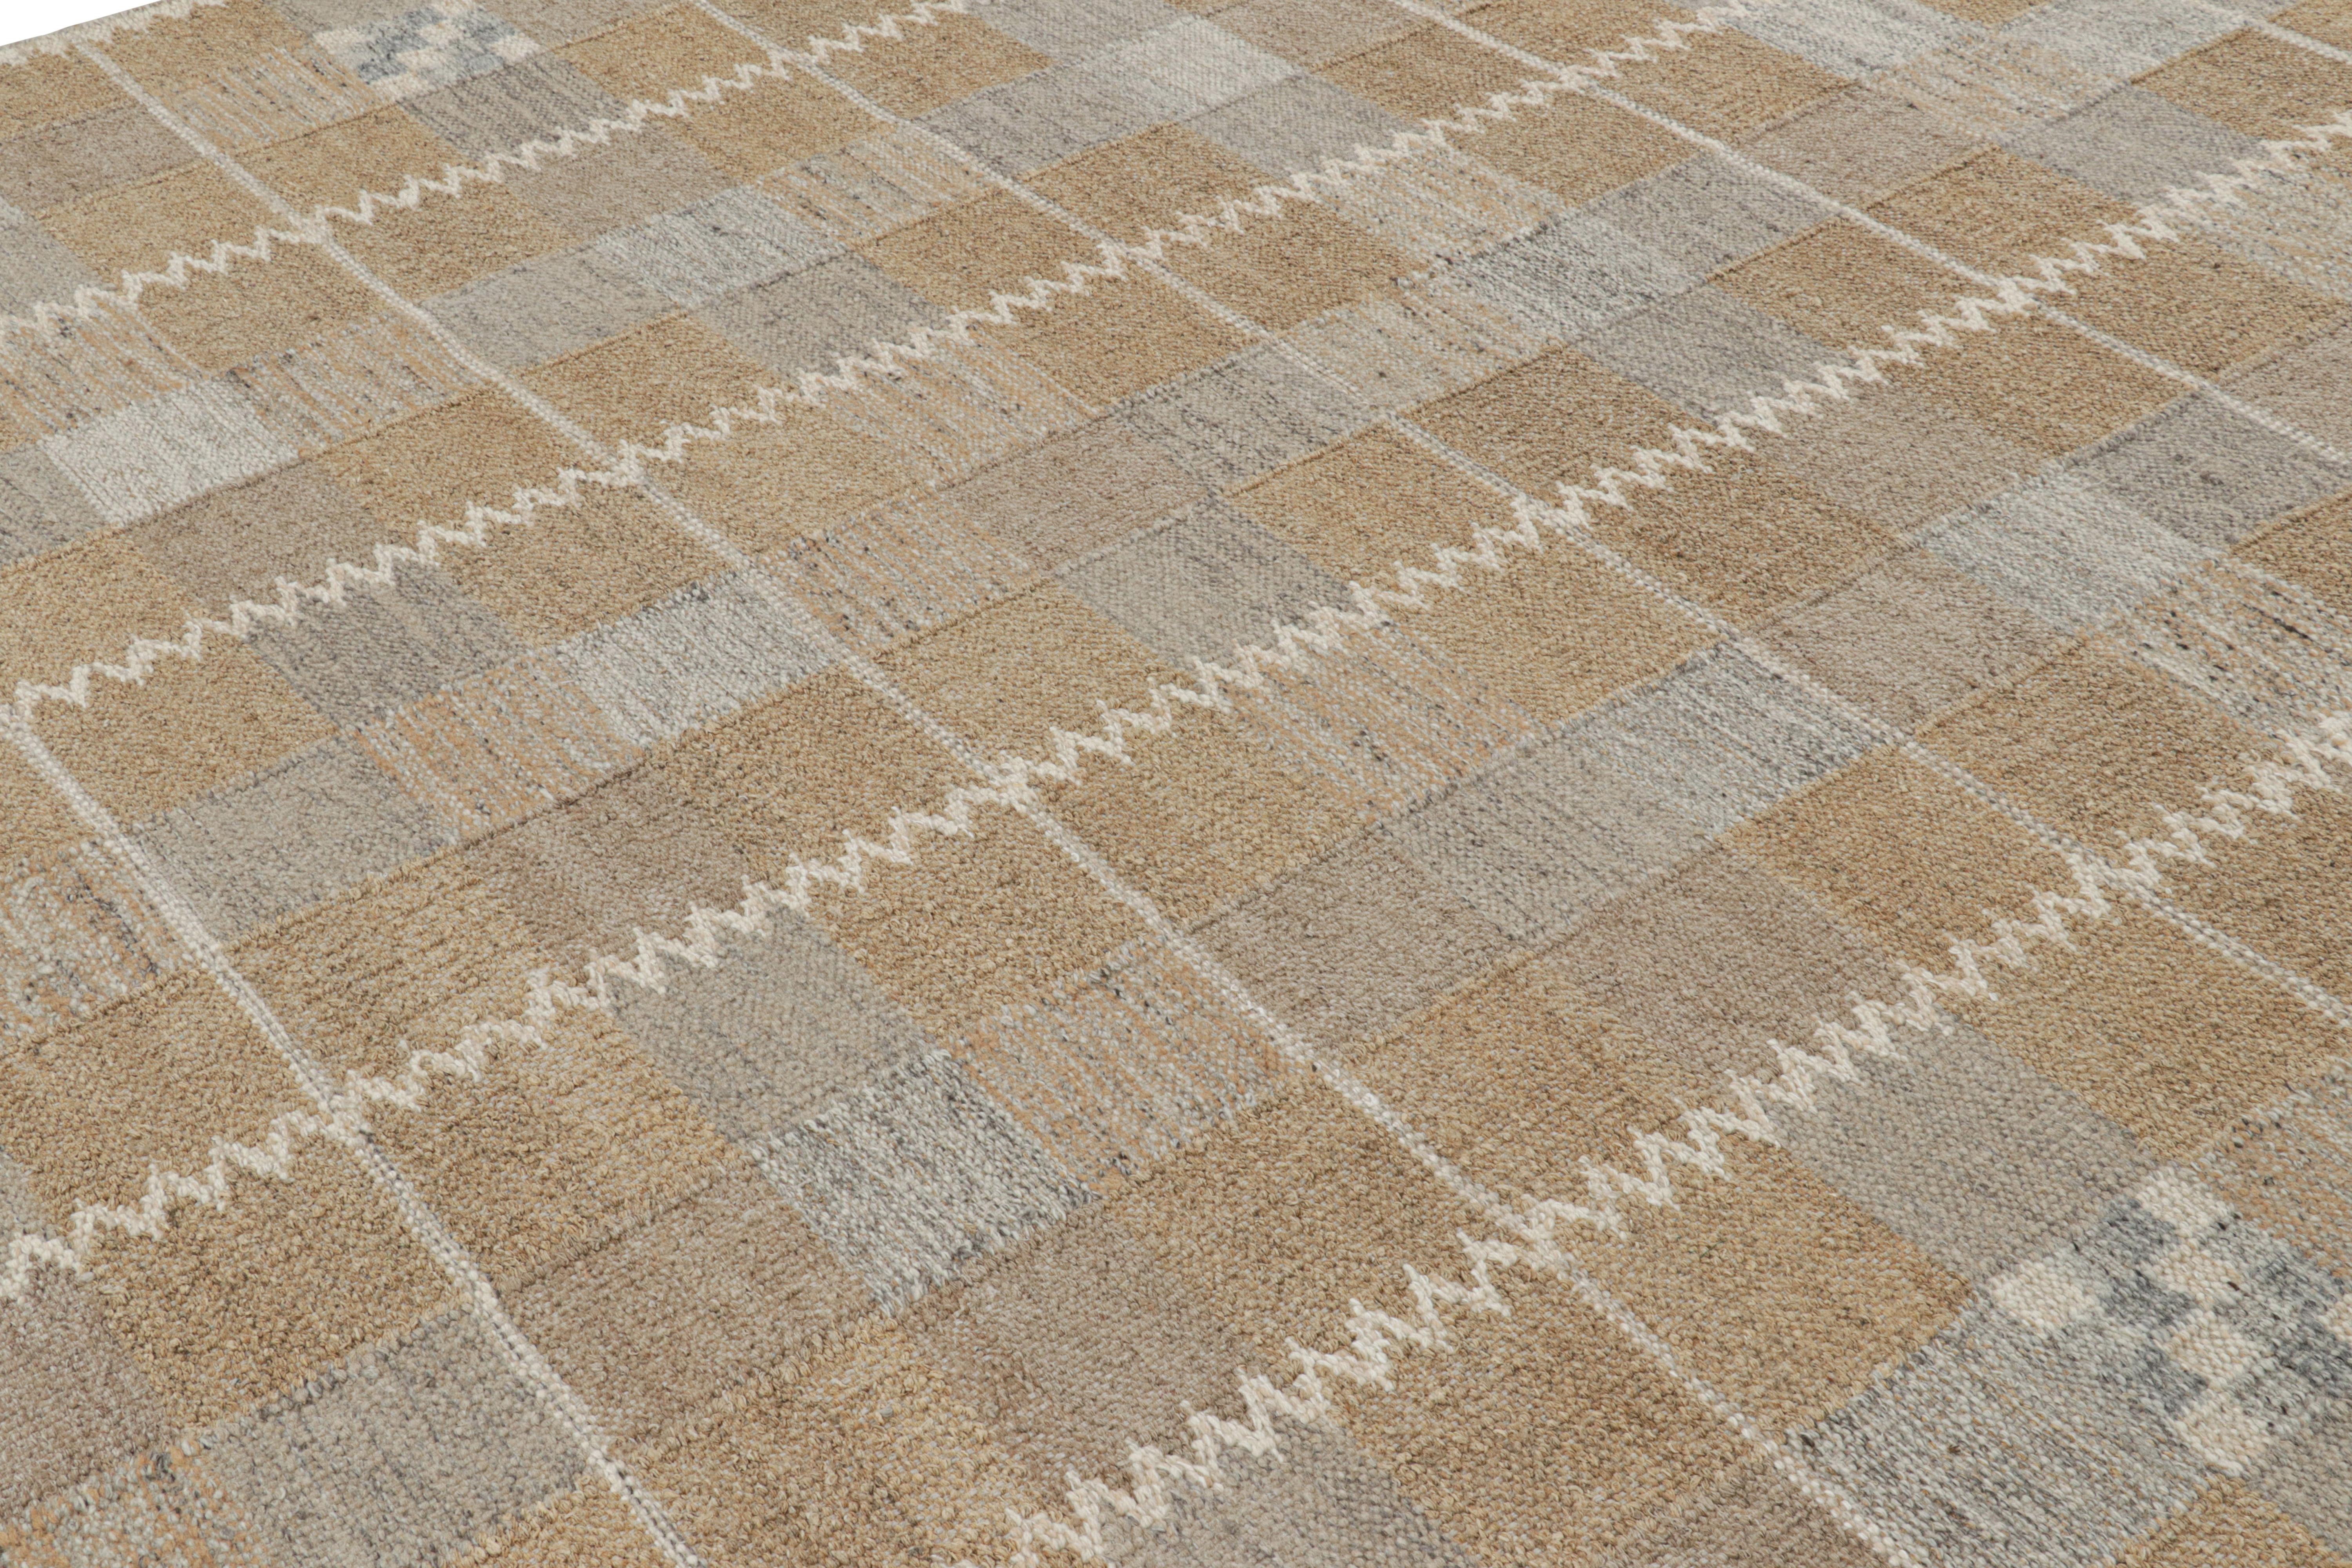 This 9x12 rug is a bold new addition to Rug & Kilim’s “Natural” line. Handwoven in hemp and aloe, its design is inspired by Swedish minimalism and Deco sensibilities. 

On the Design: 

Admirers of the craft will admire undyed, natural yarns